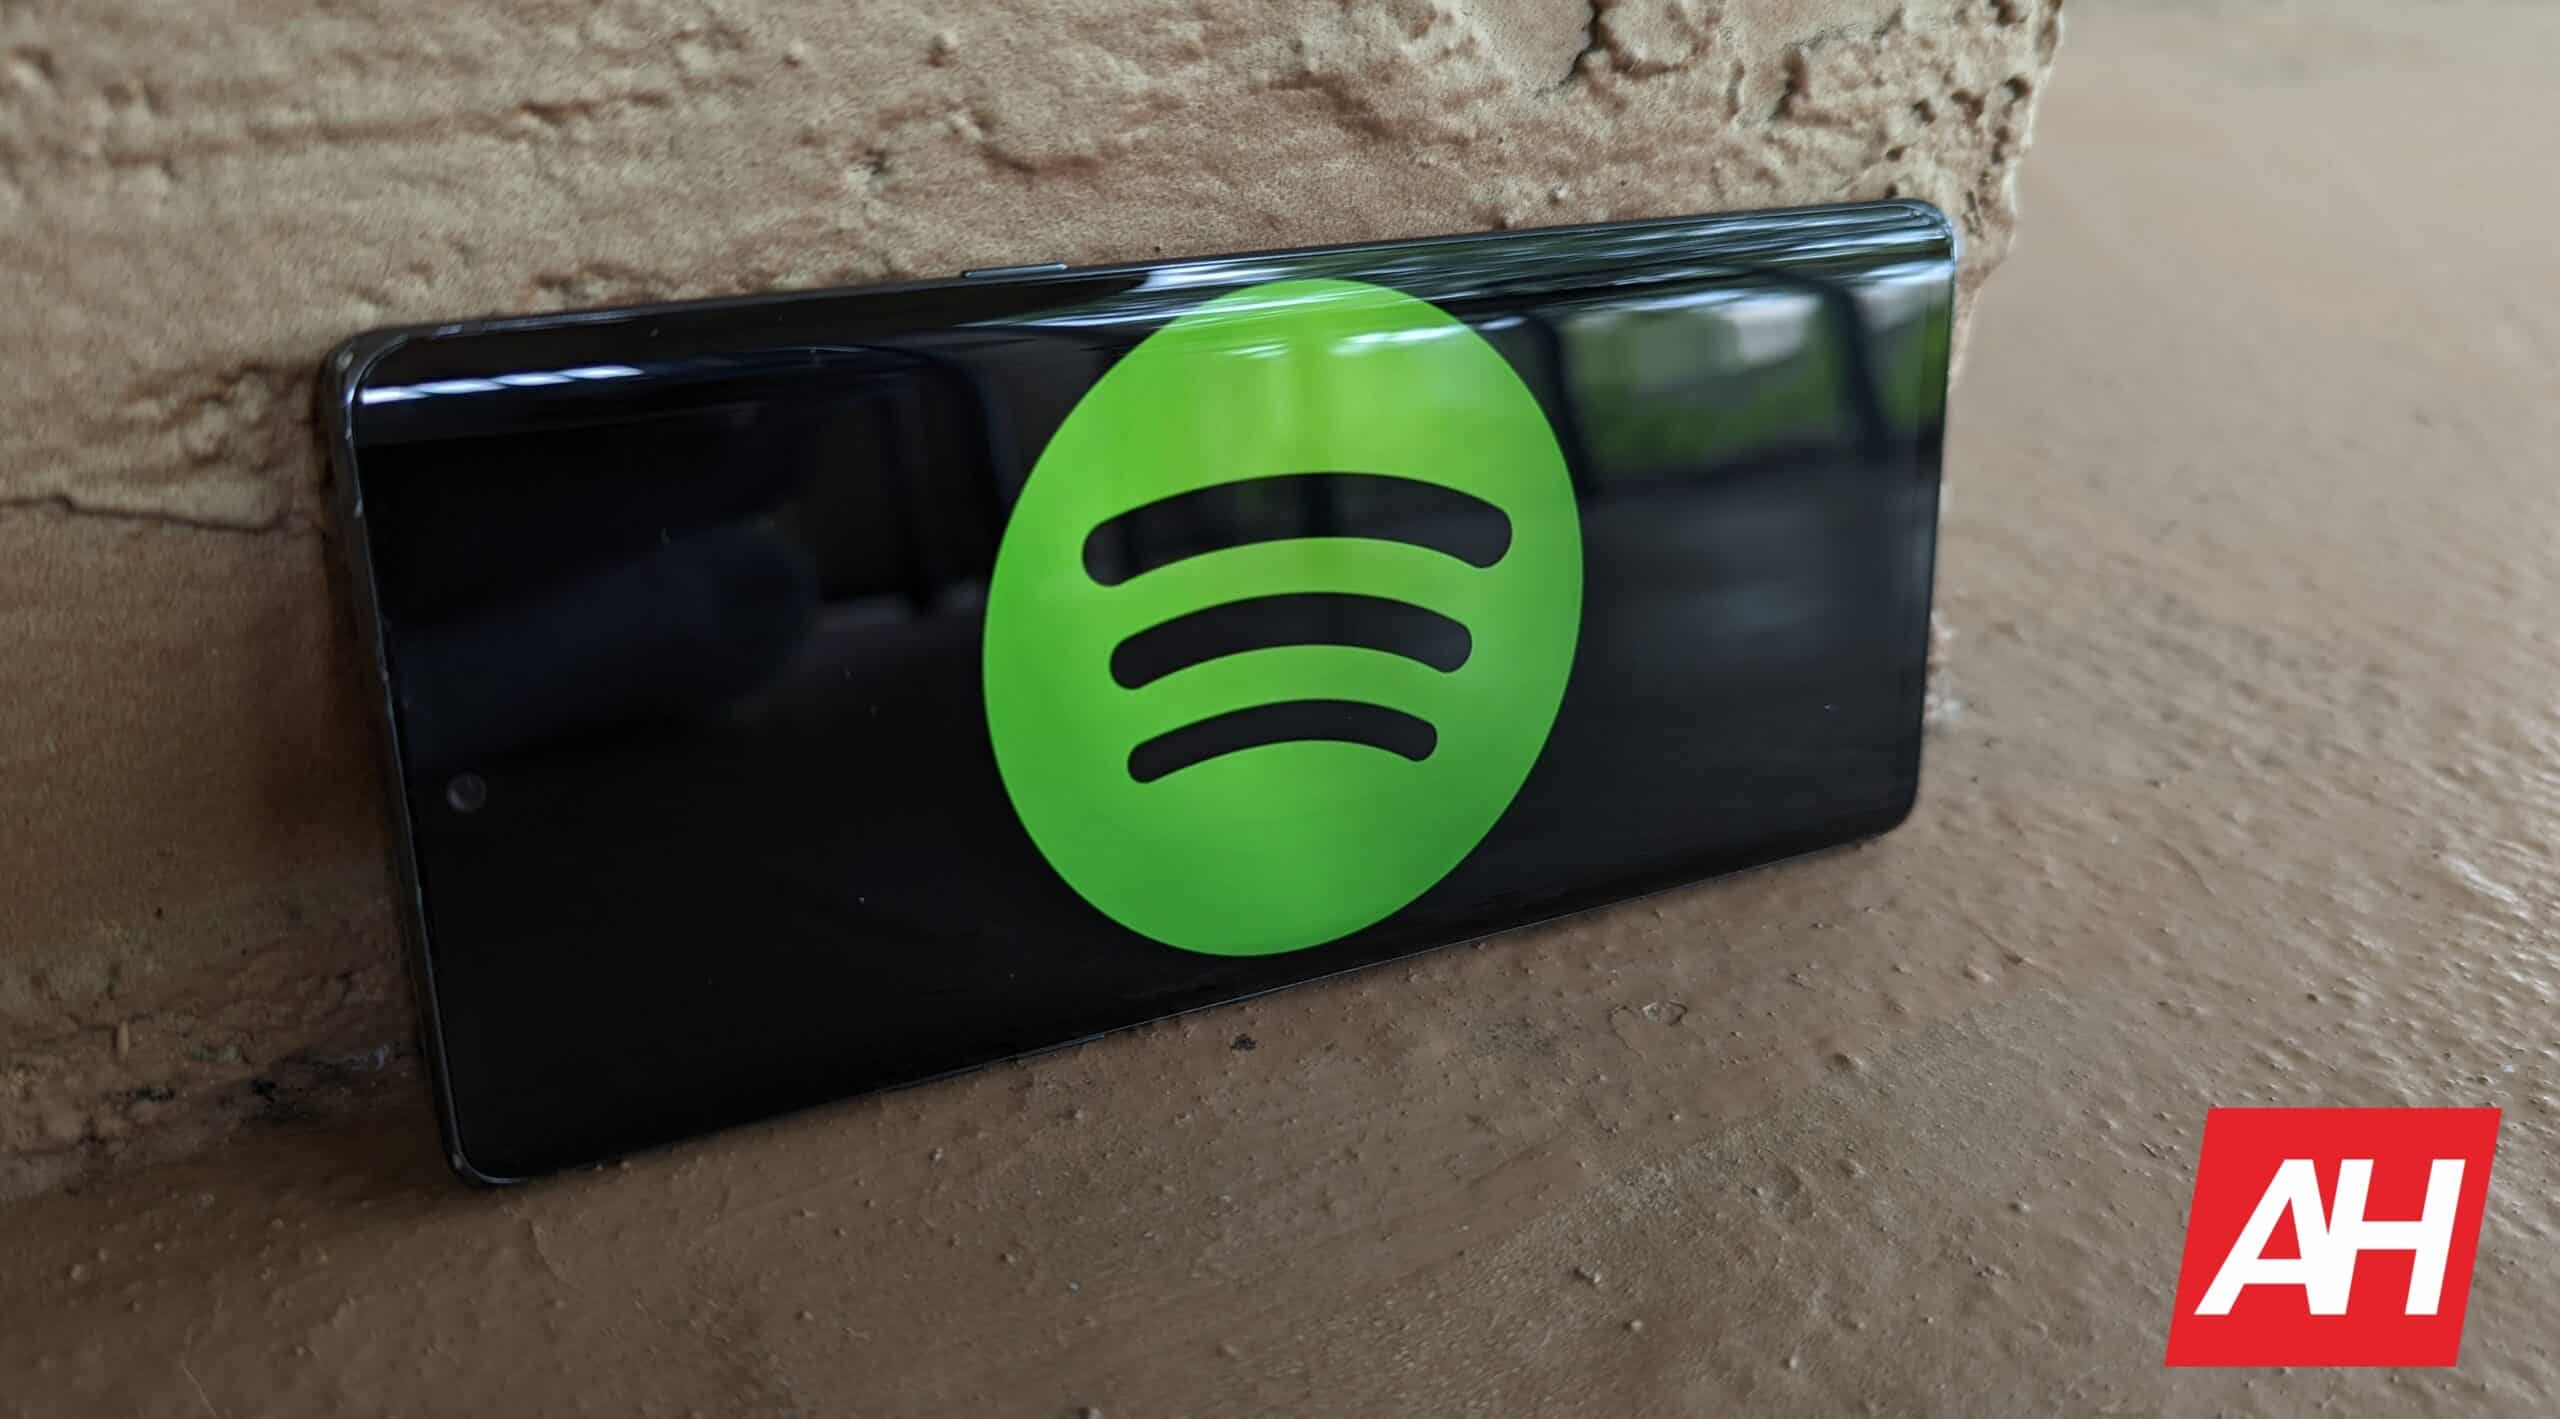 Spotify receives copyright notices from music publishers